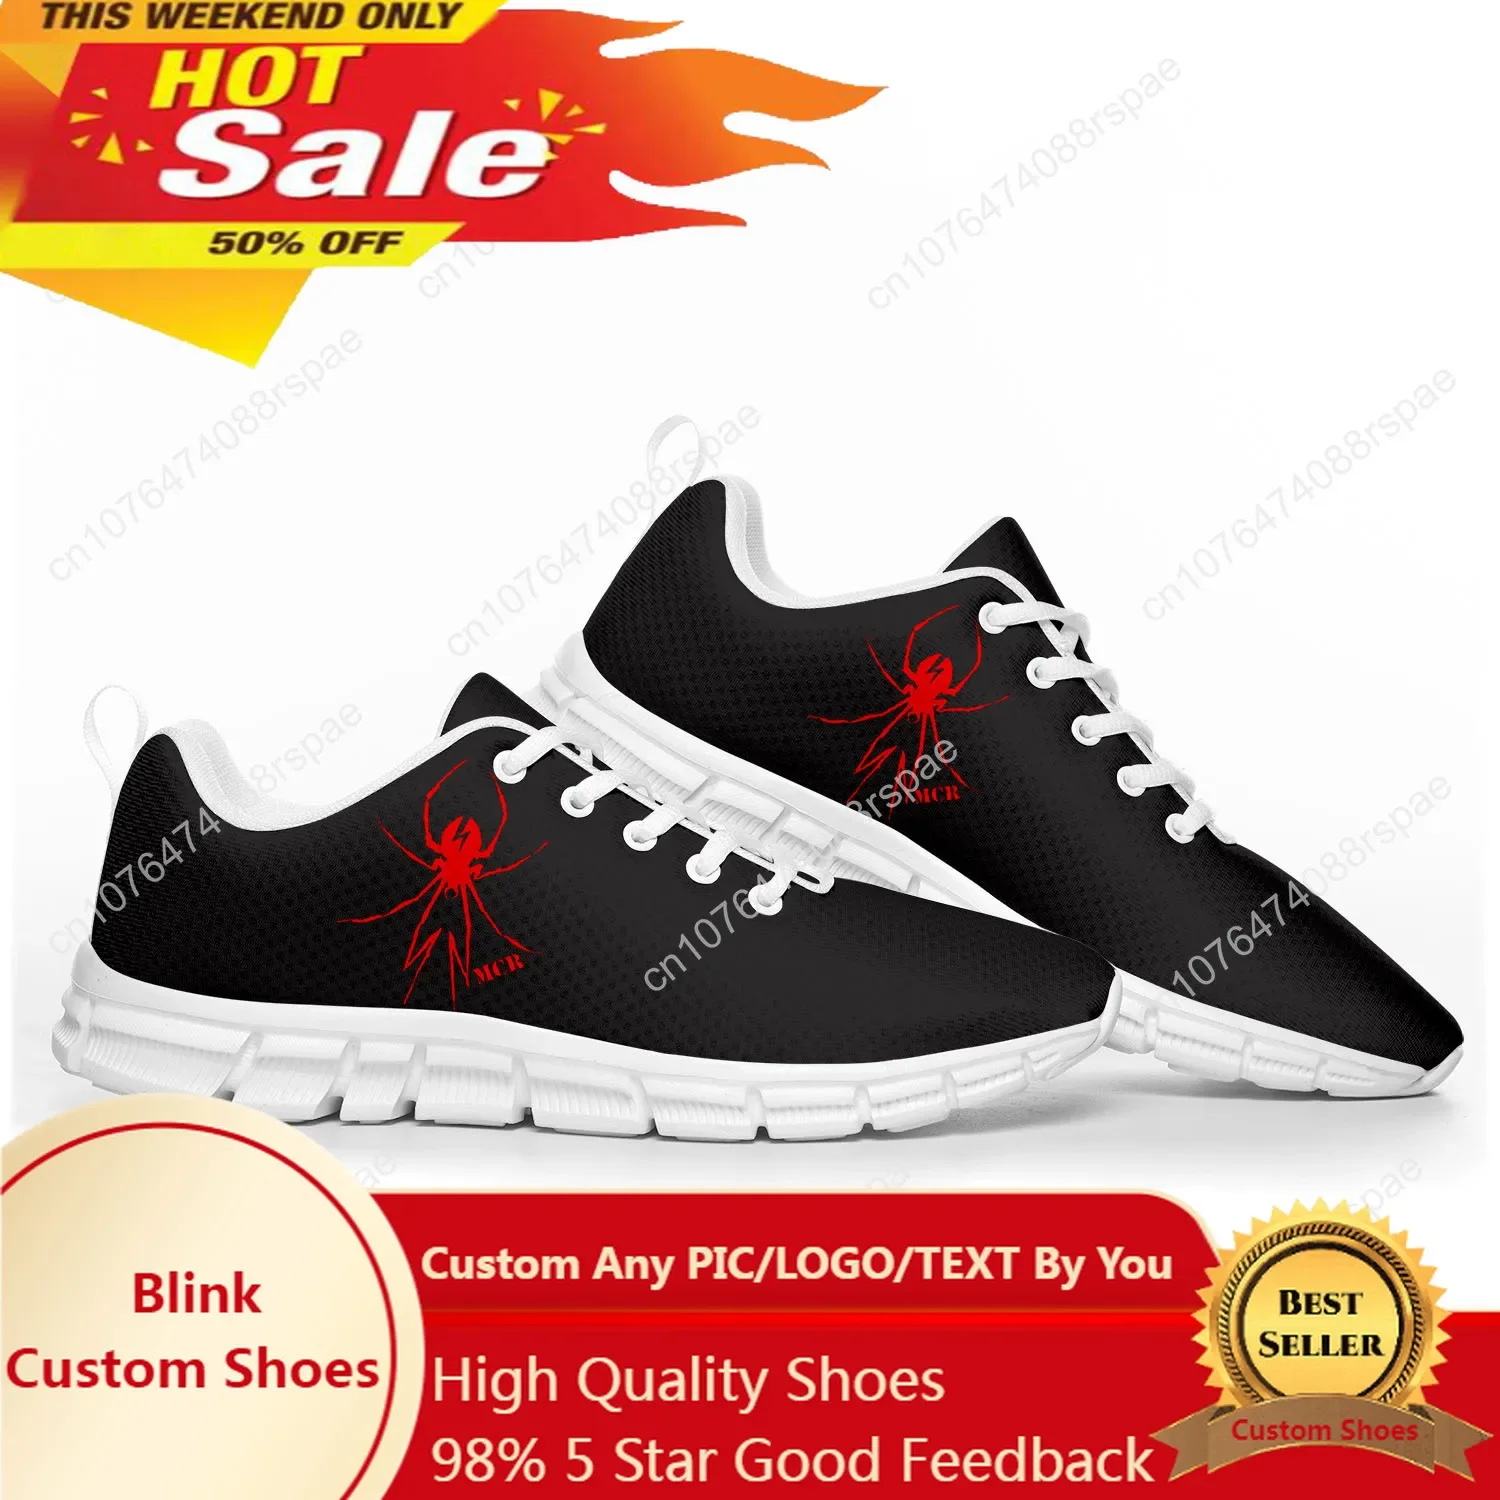 Romance Rock Band Chemical My Fashion Sports Shoes Mens Womens Teenager Kids Children Sneakers Custom High Quality Couple Shoes disney fashion frozen princess children sandals beautiful classic high quality girls shoes lovely noble kids single sneakers